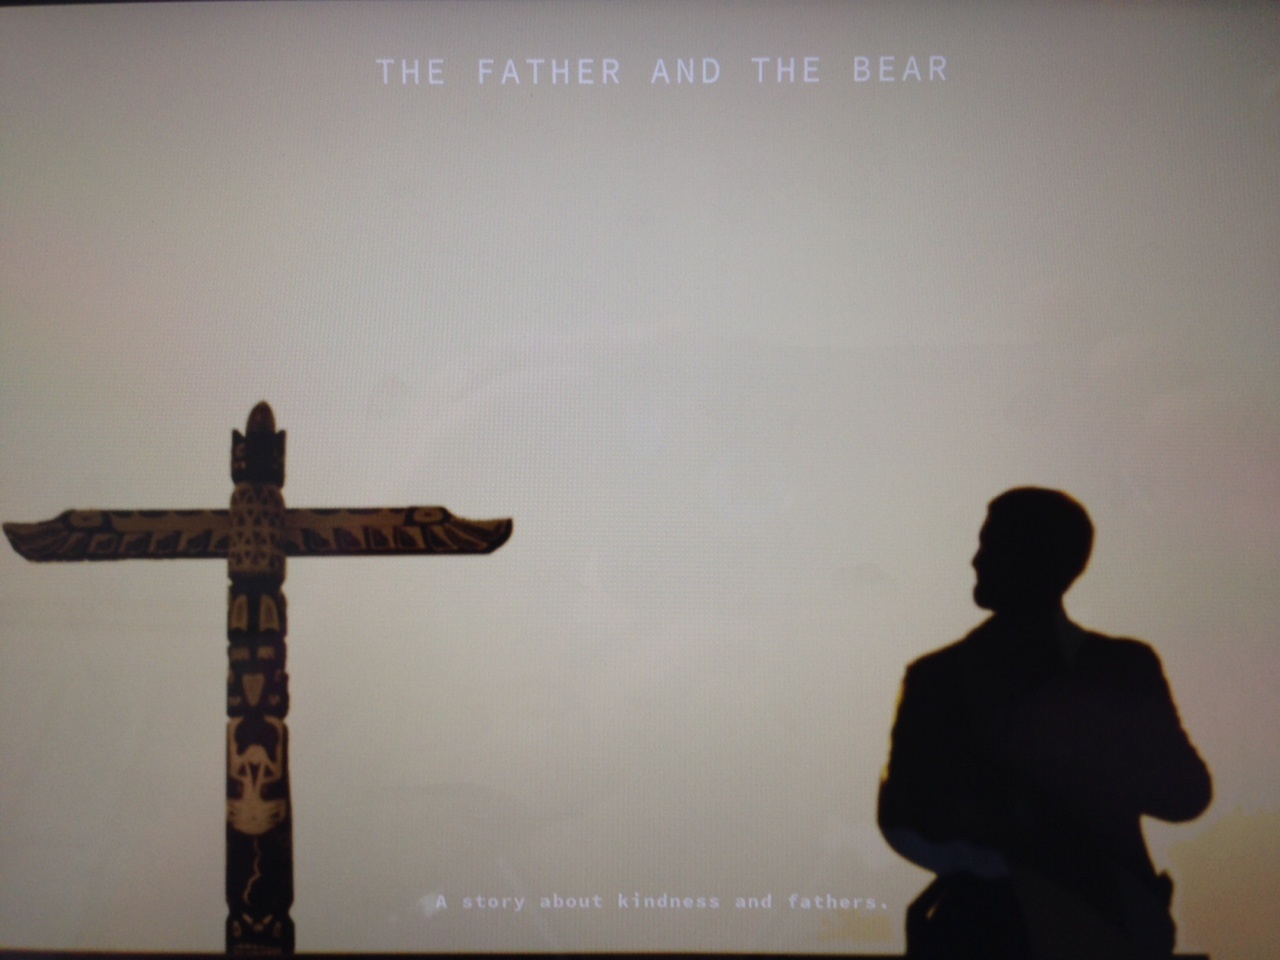 The Father and The Bear by John Putch